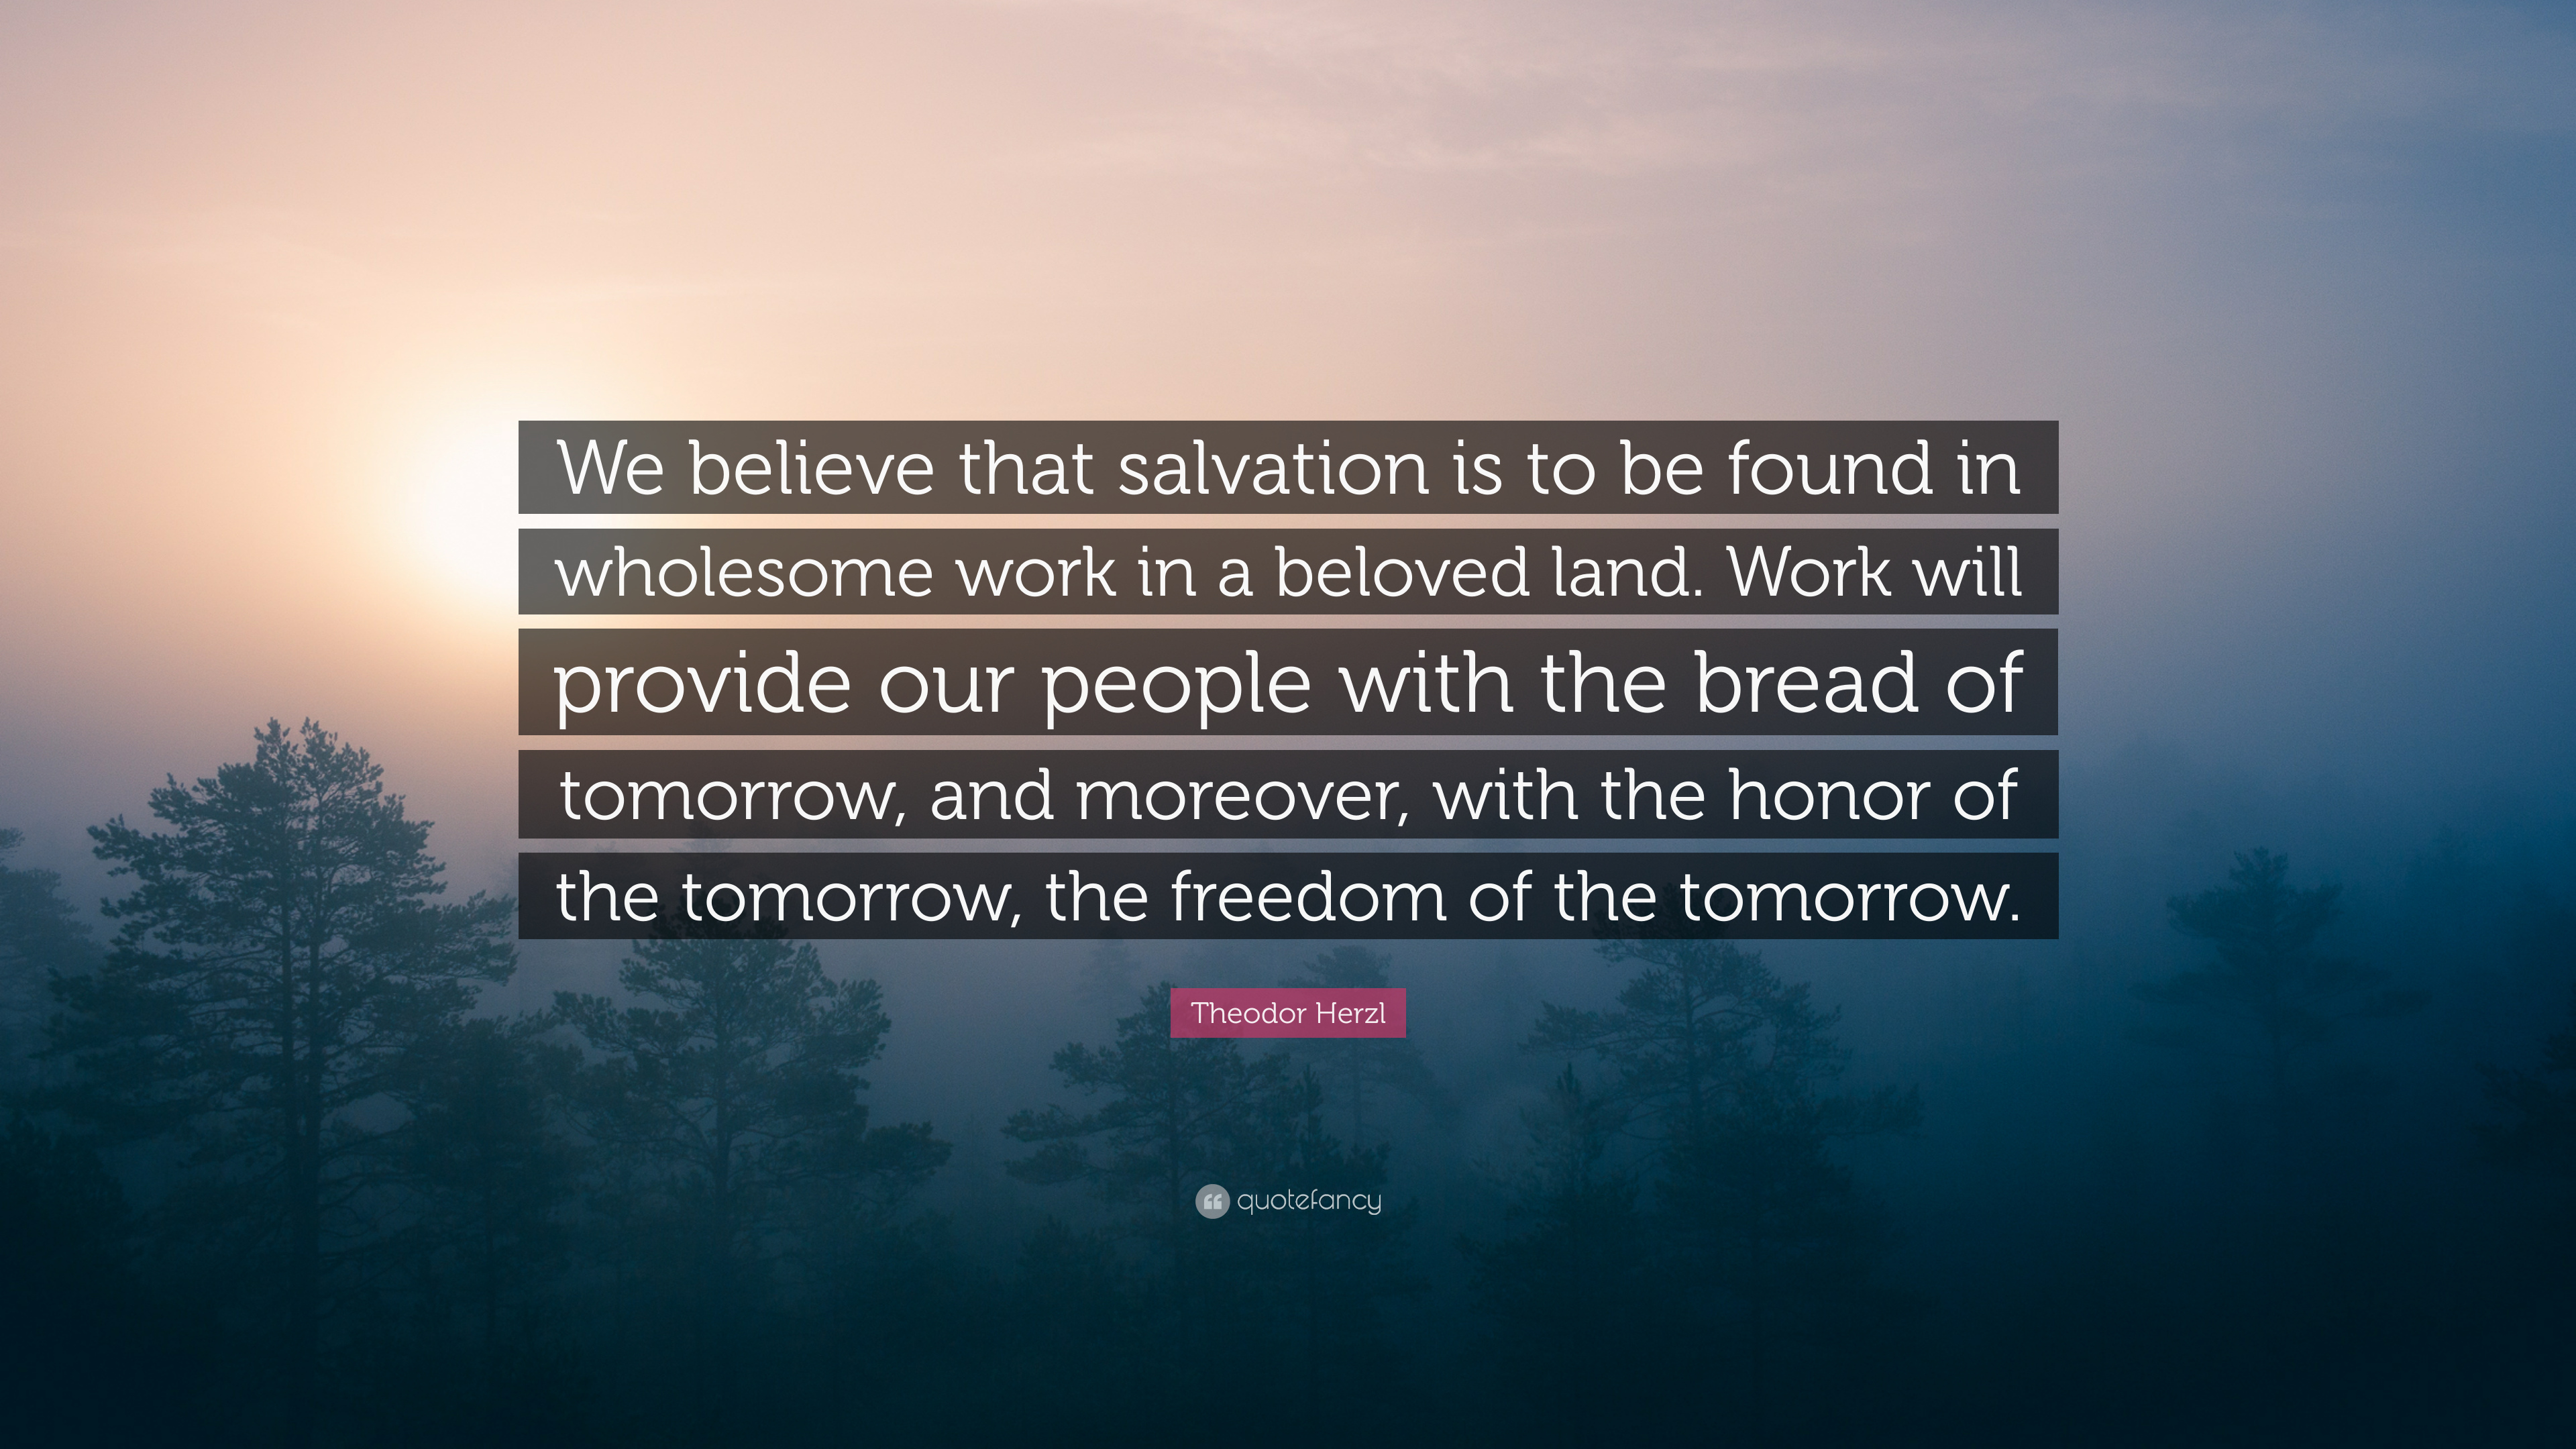 Theodor Herzl Quote: “We believe that salvation is to be